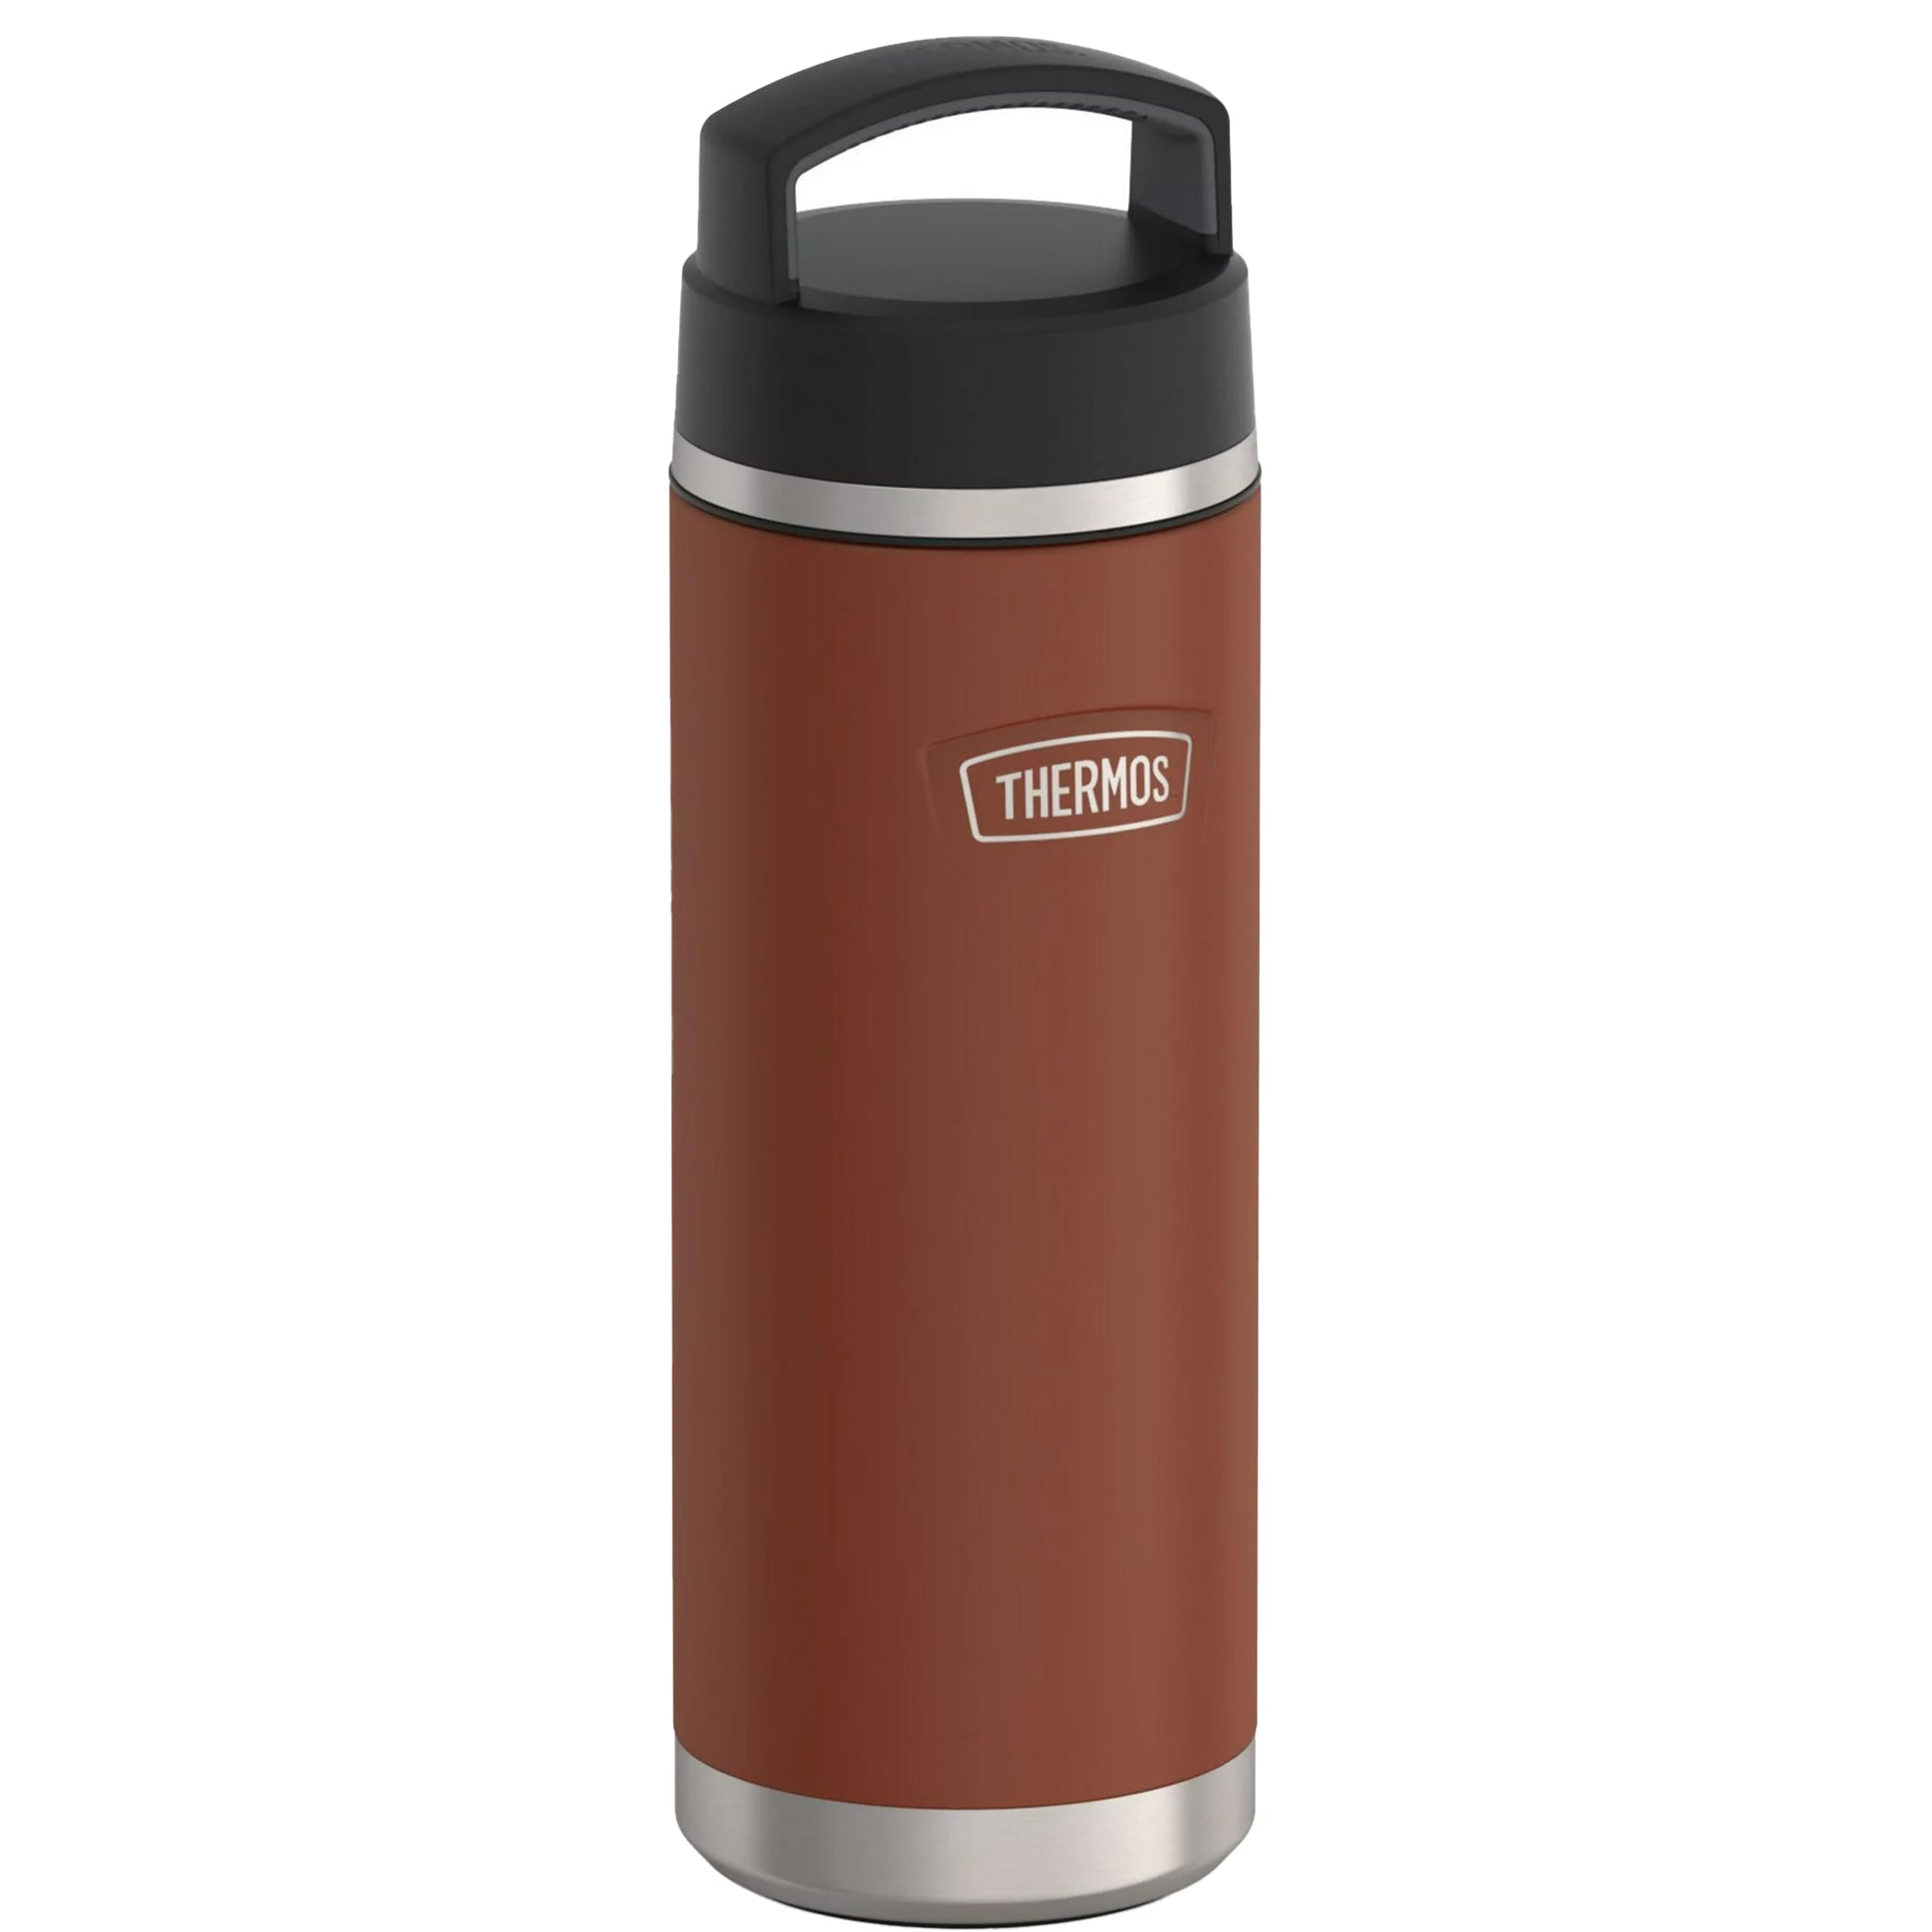 Thermos 32 oz. Icon Insulated Stainless Steel Screw Top Water Bottle Thermos